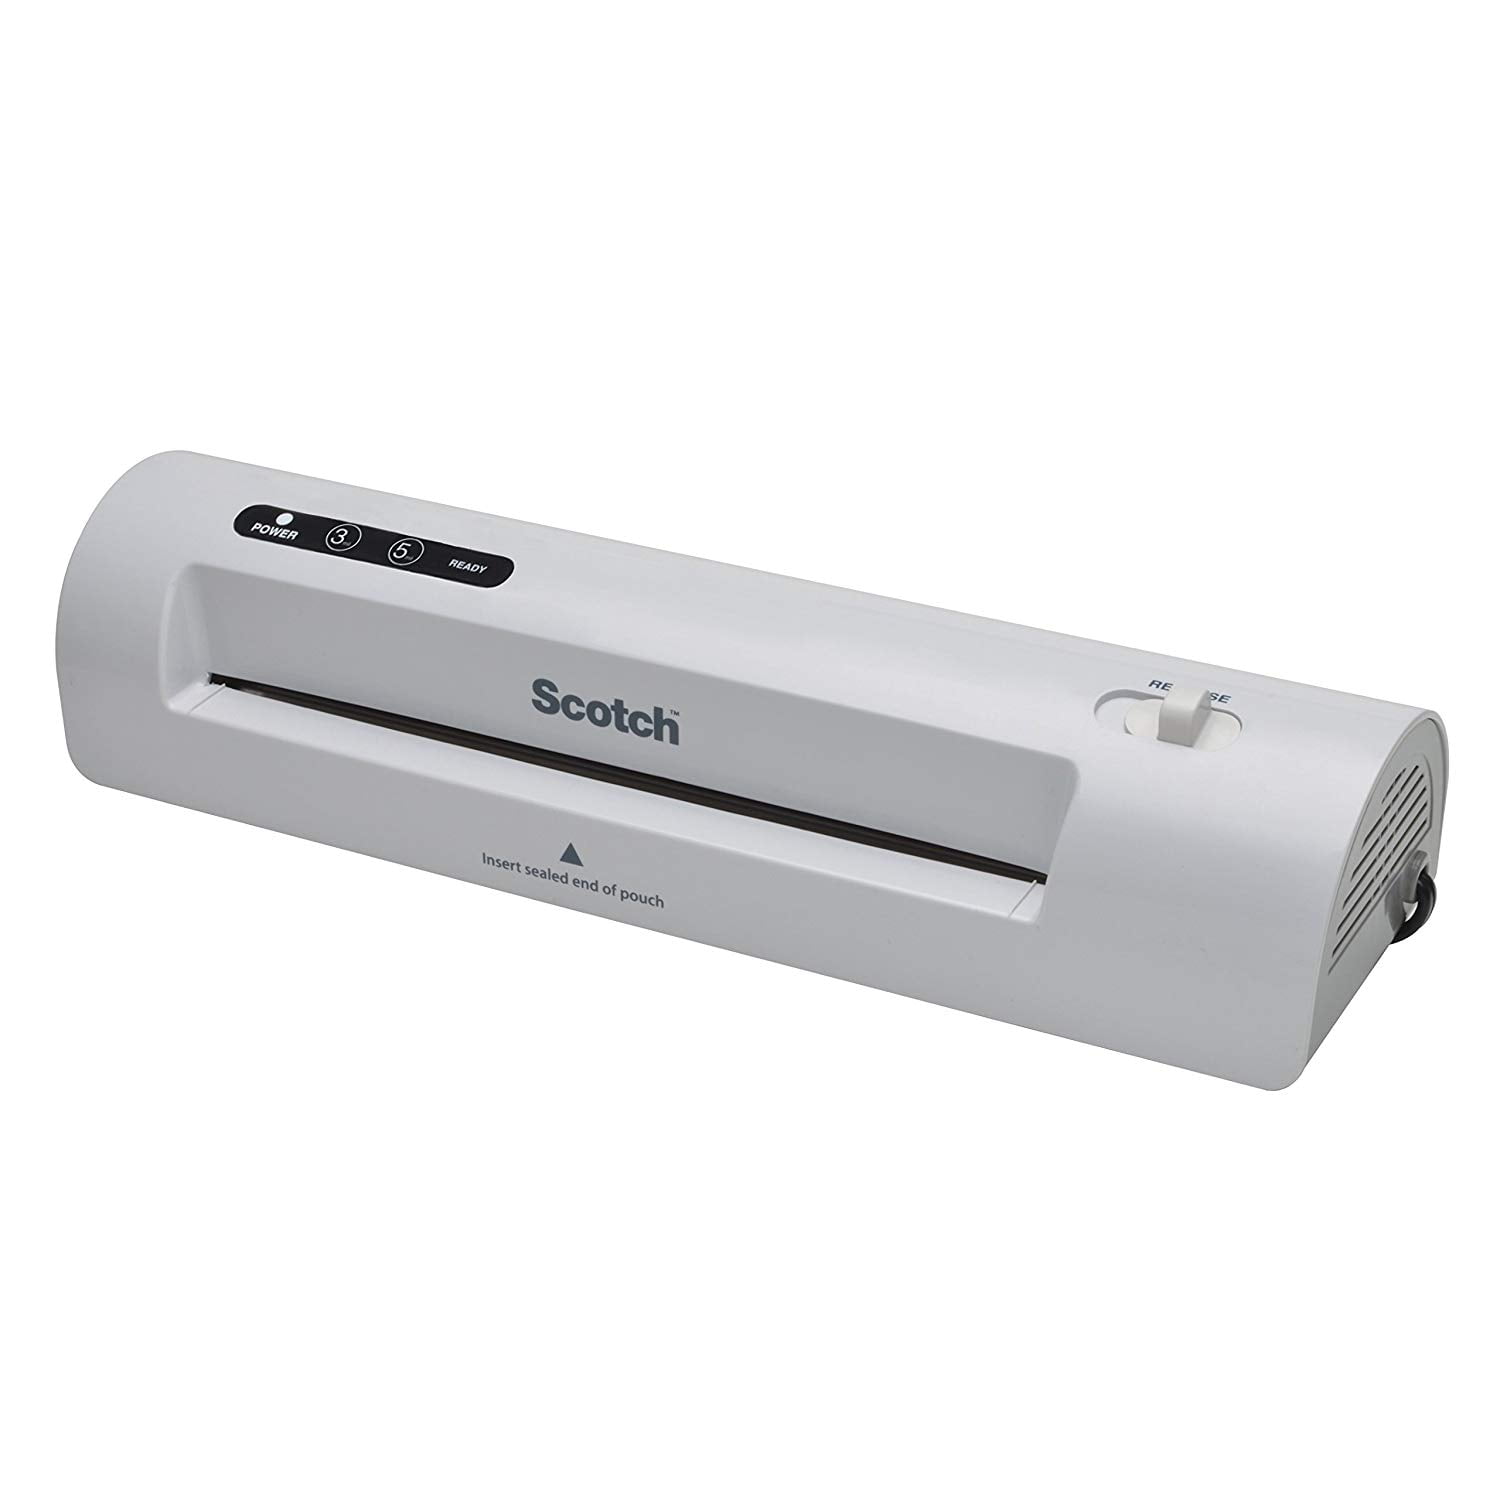 Scotch TL901C Thermal Laminator 2 Roller System Bundle with 100 Assorted Pouch Sizes and a Plexon Pen 7